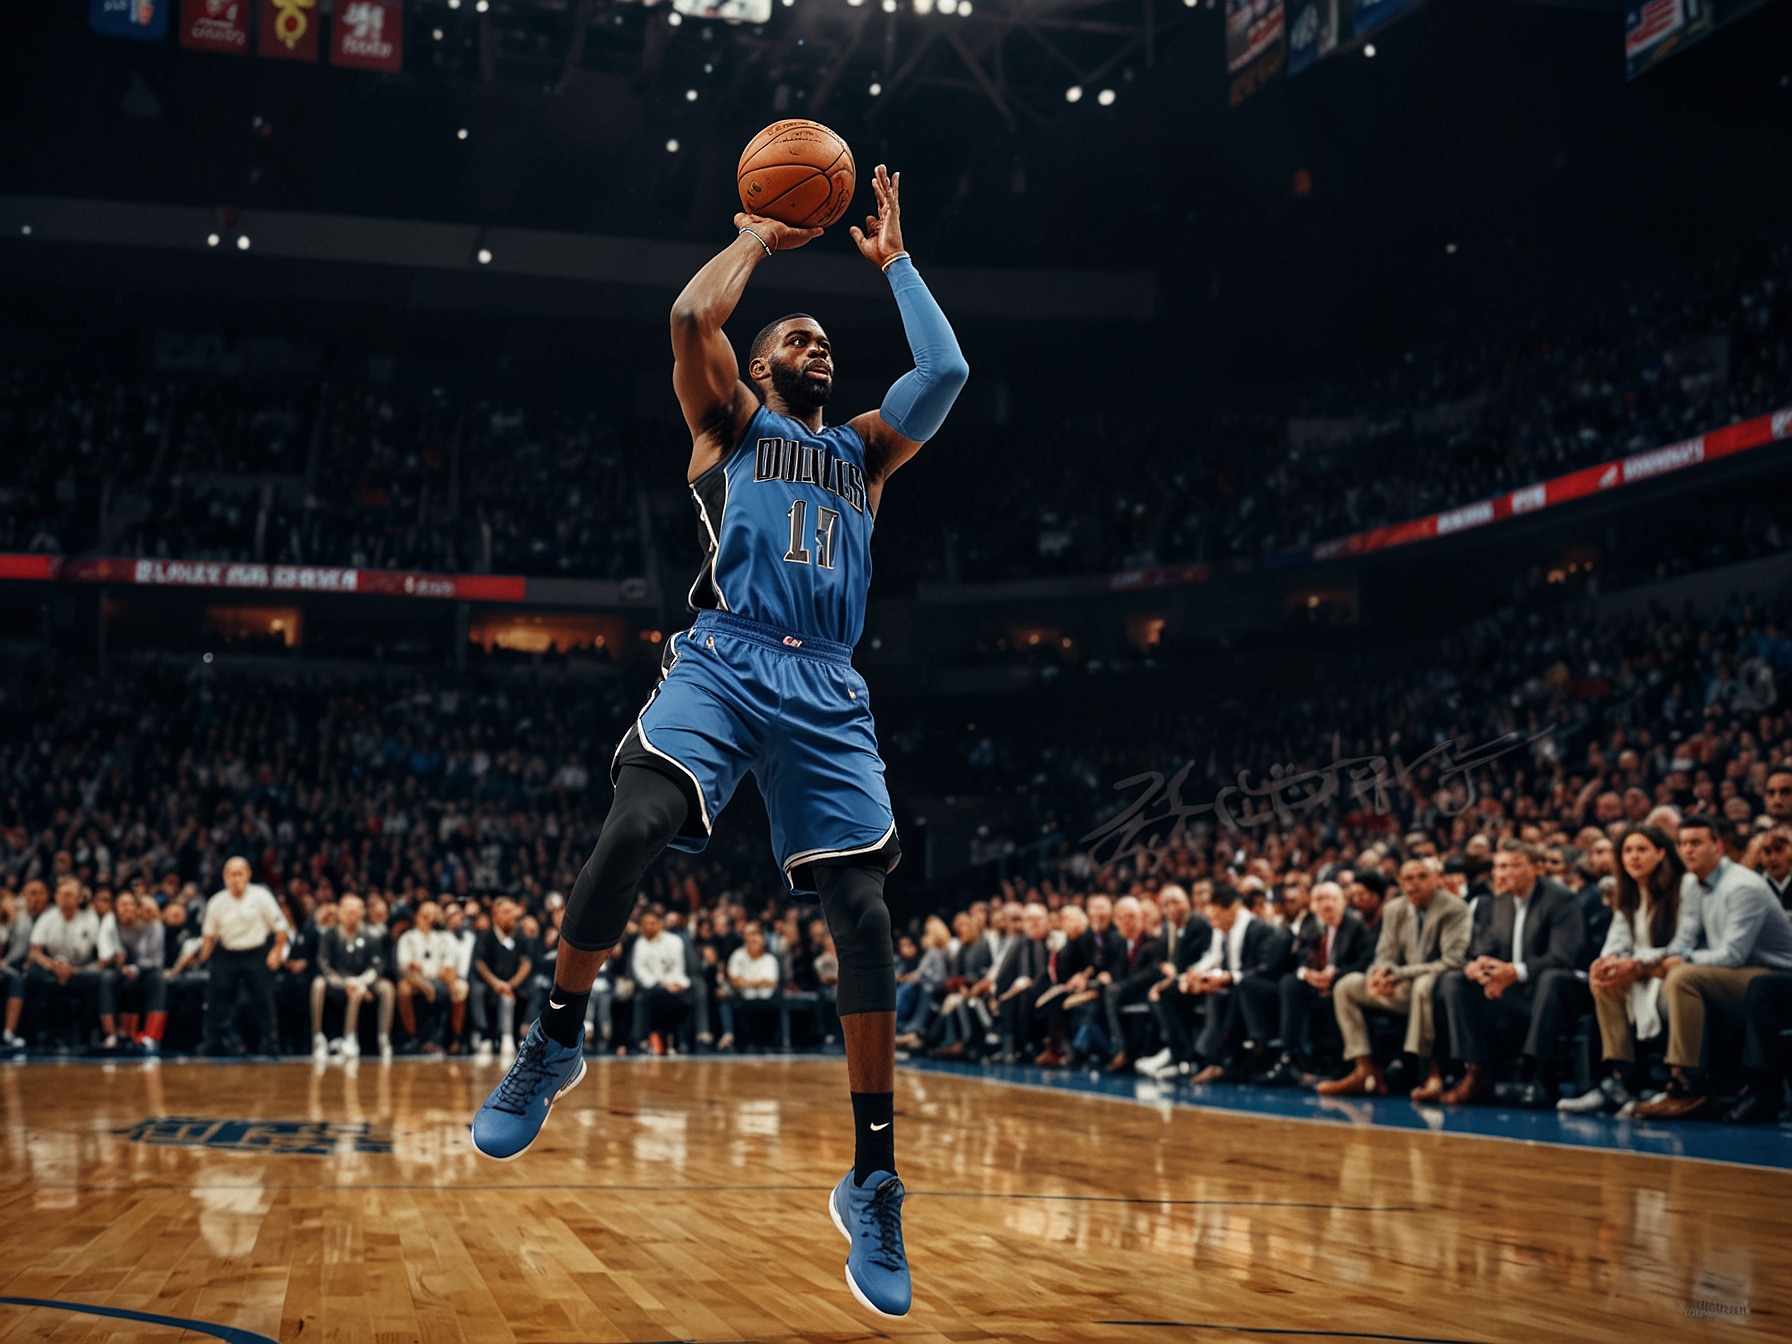 Tim Hardaway Jr., in his Dallas Mavericks jersey, executing a three-point shot during a high-stakes game, illustrating his scoring prowess and the end of his era with the team.